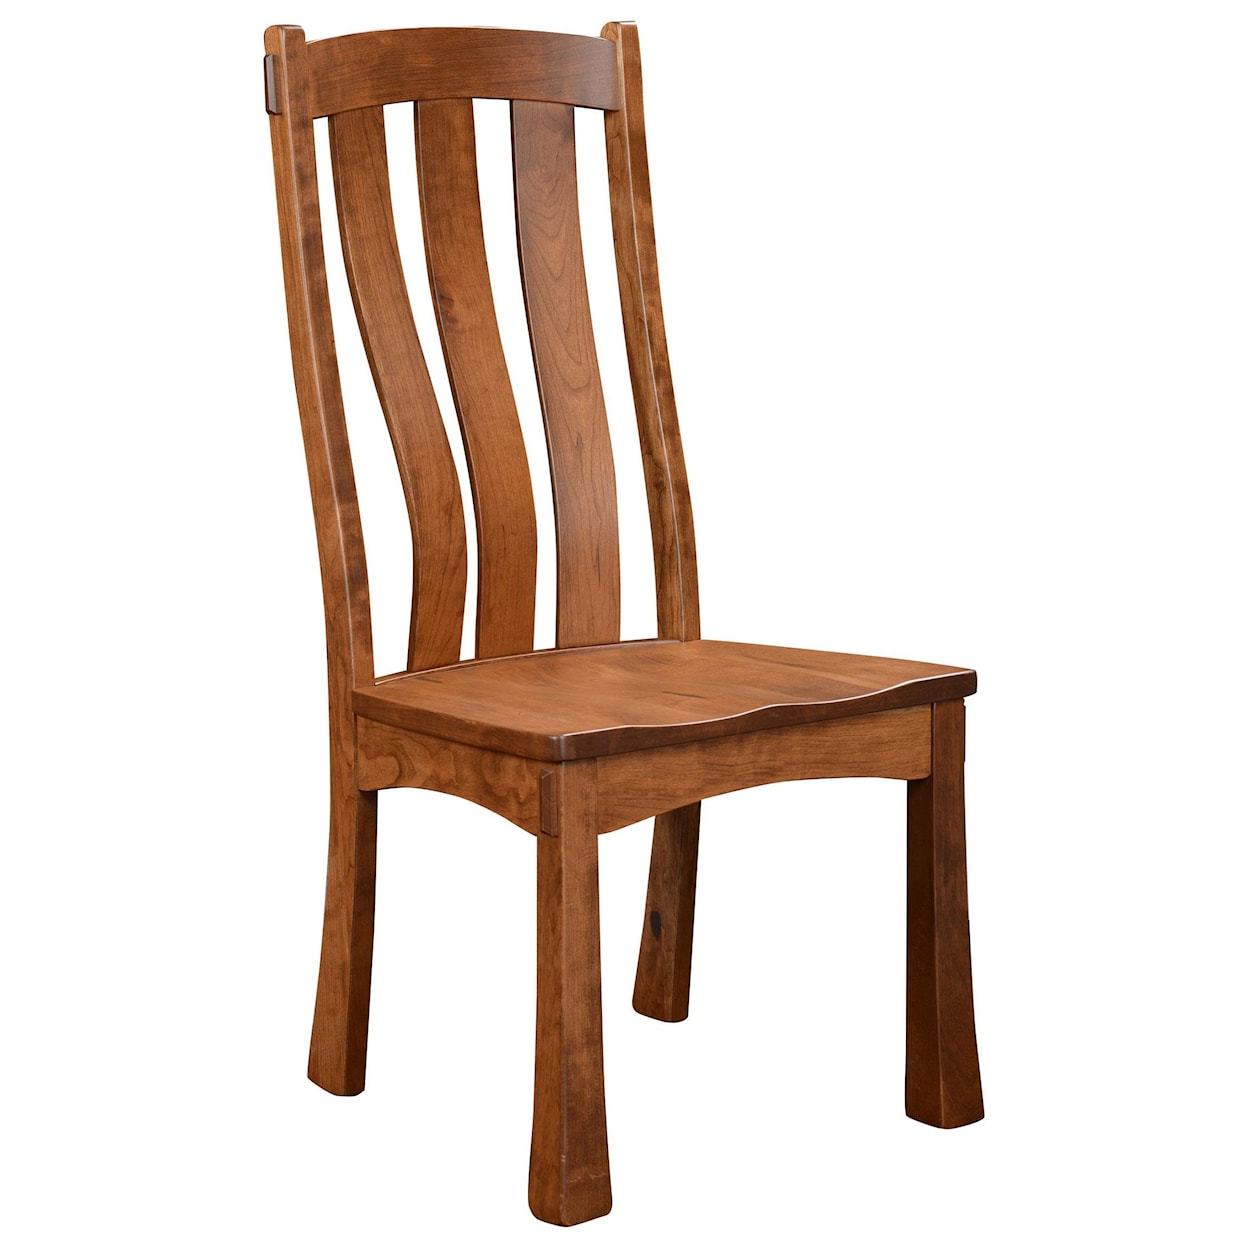 Wengerd Wood Products Monarch Side Chair